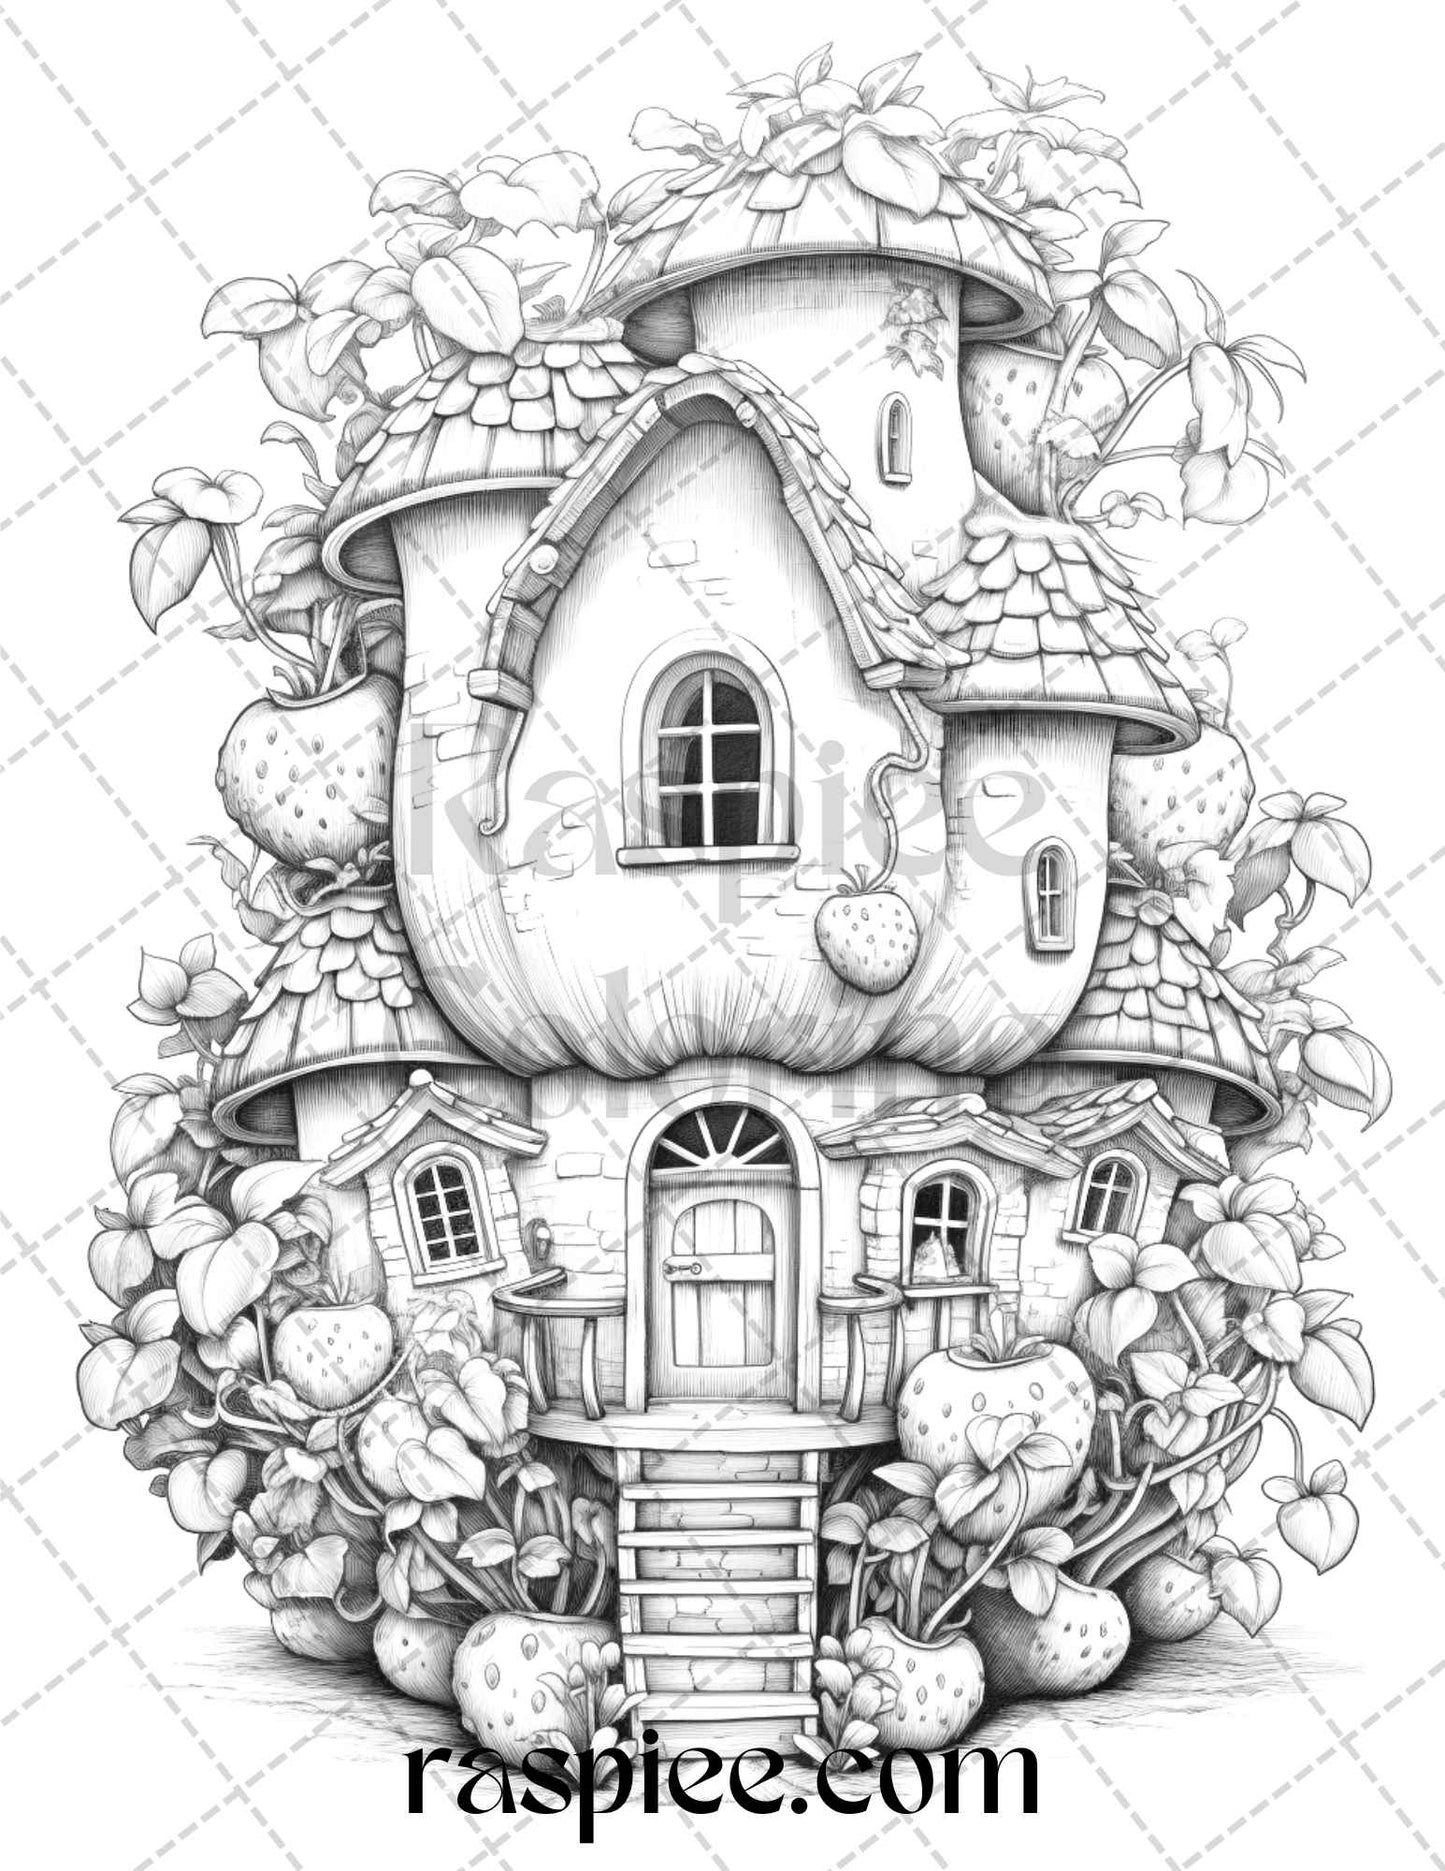 grayscale coloring pages, printable coloring pages, adult coloring pages, kids coloring pages, strawberry houses, grayscale art, coloring book, digital download